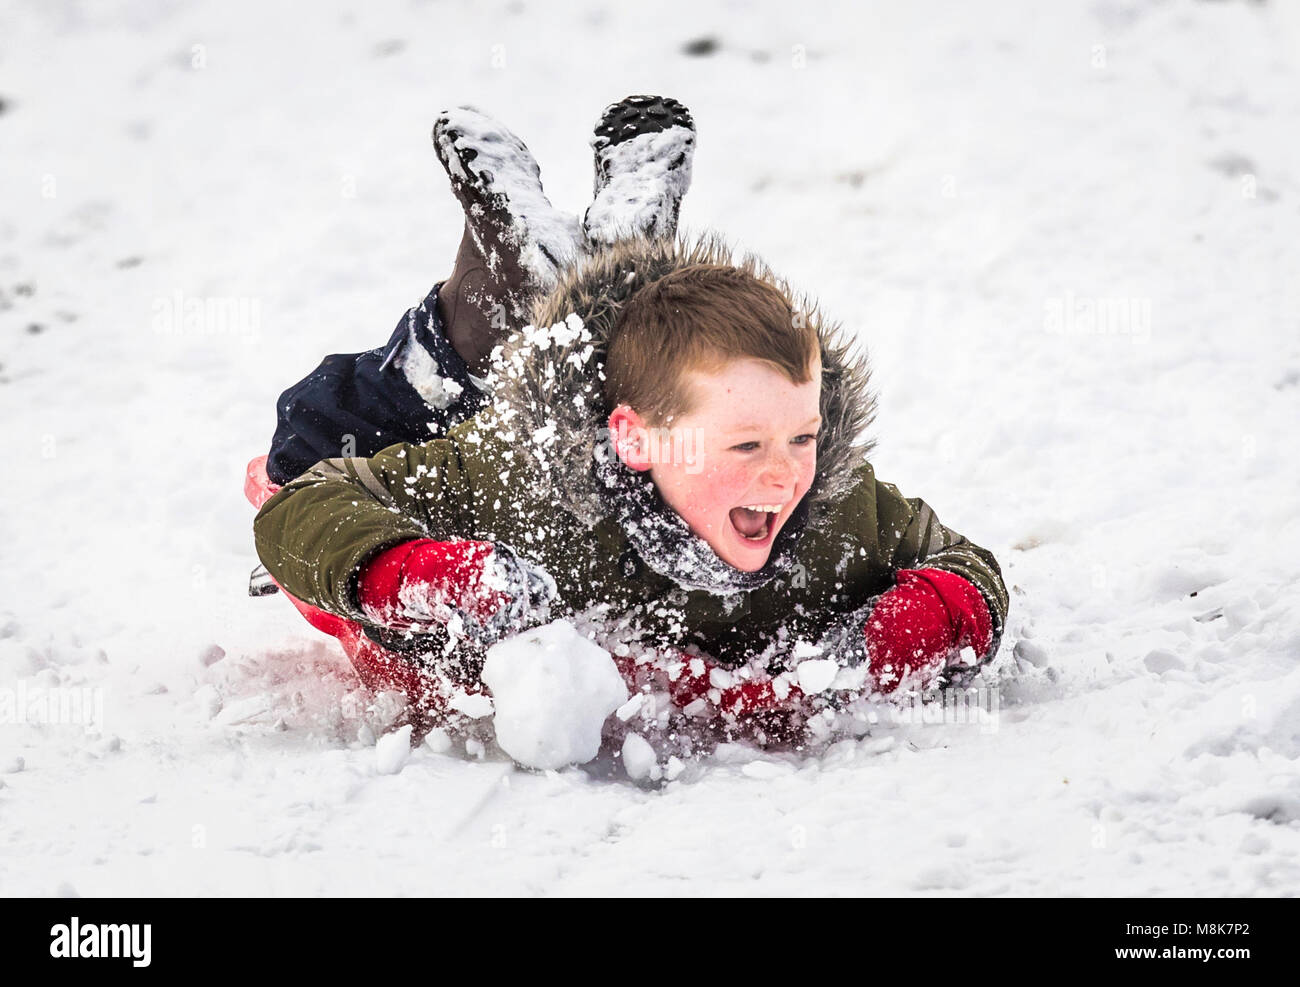 Luke Clarke, seven, sledging in the snow in Chapel-en-le-Frith, Derbyshire, as the wintry snap dubbed the mini beast from the east keeps its grip on the UK. Stock Photo